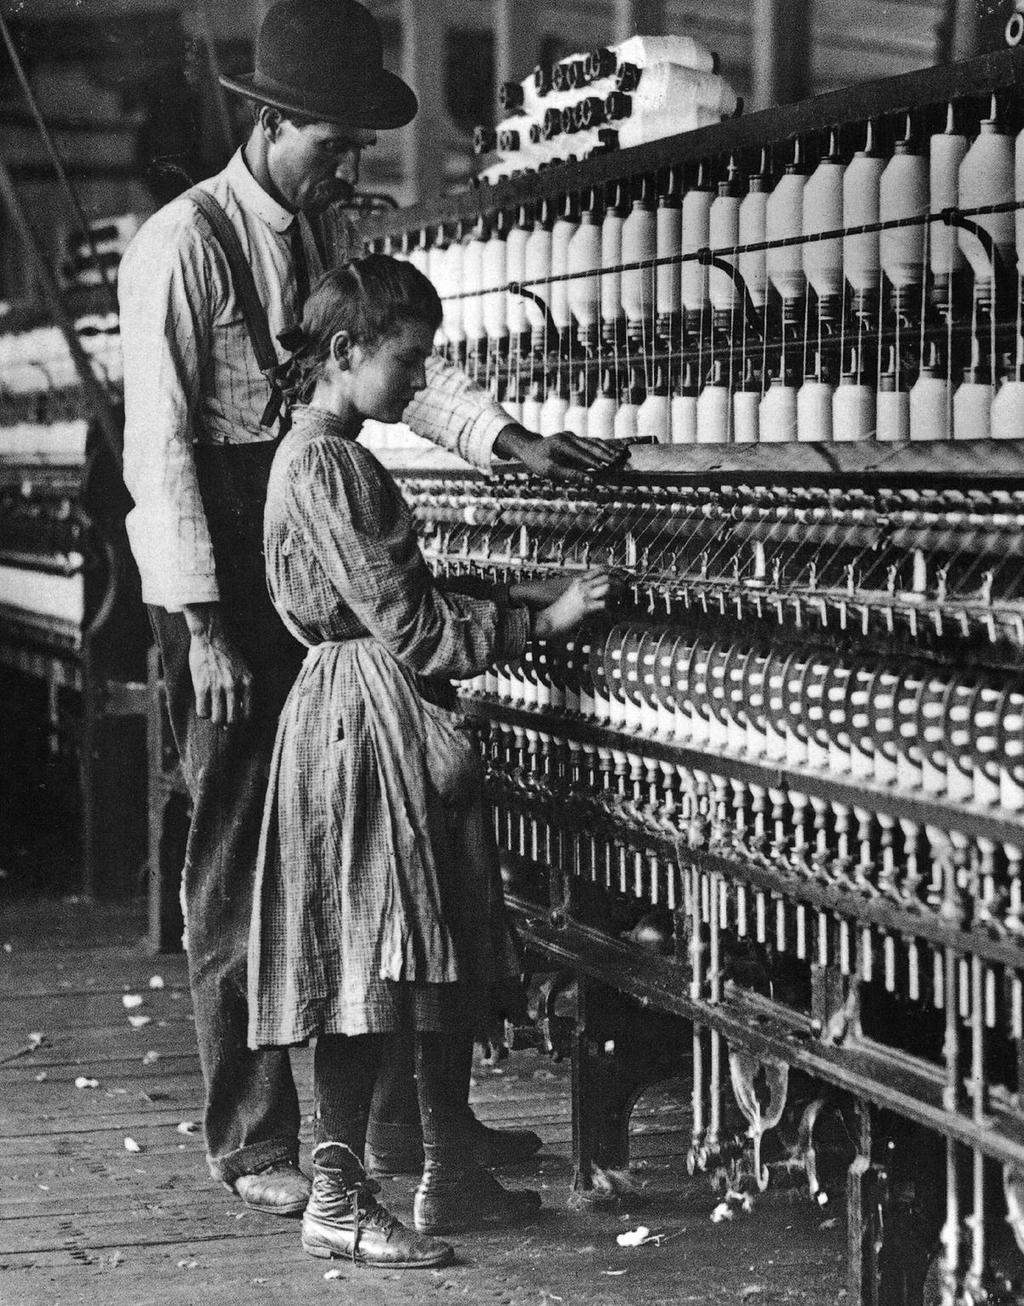 Factories added monotony to work & life Workers were not used to the direct supervision associated with factory work